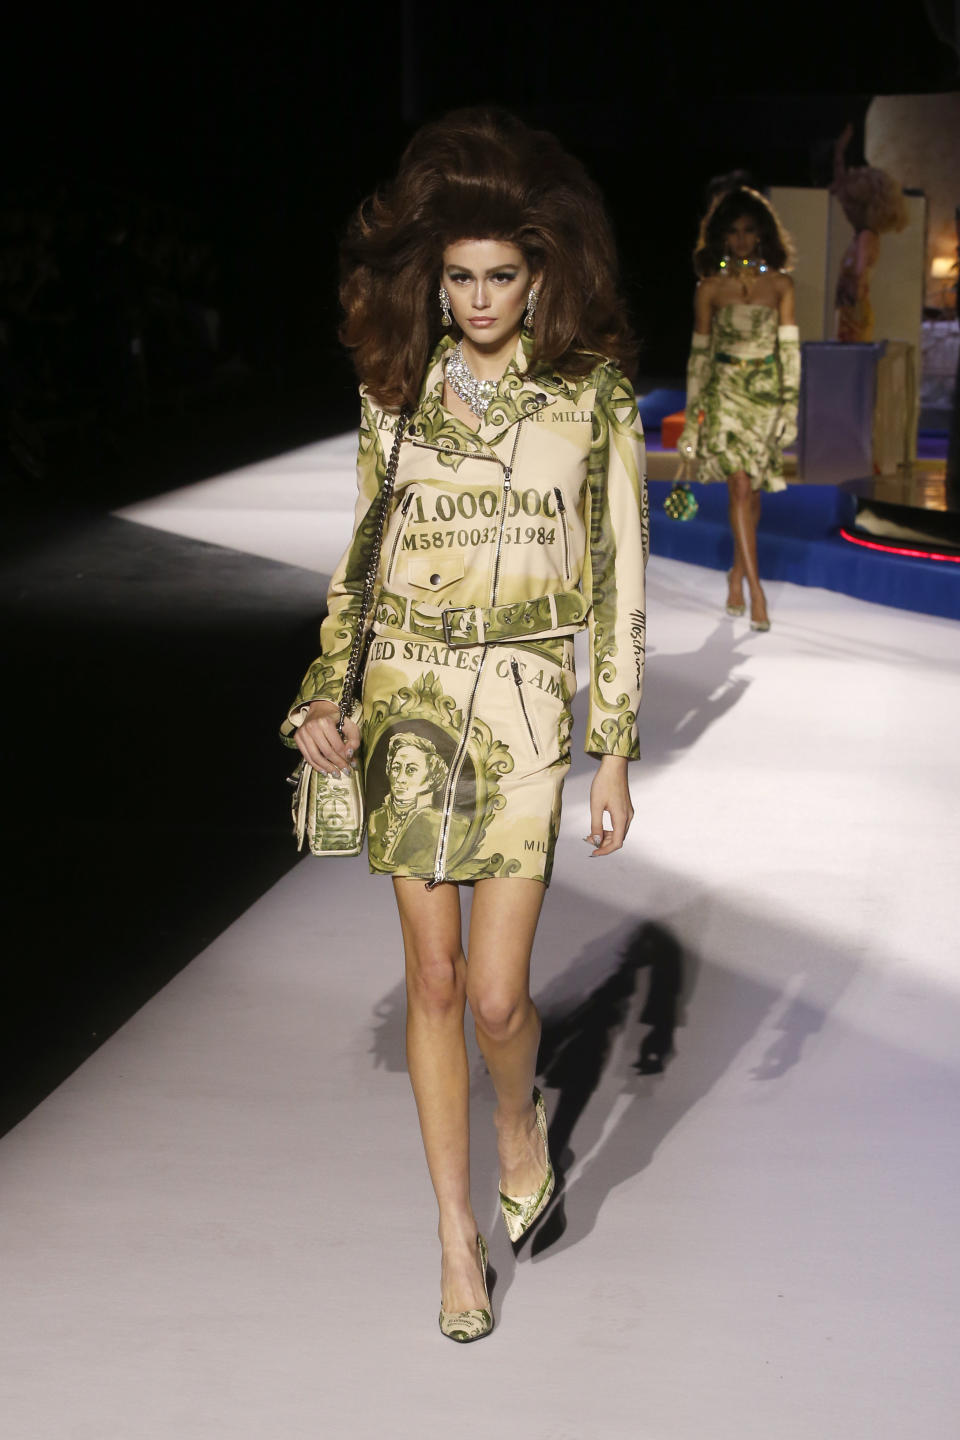 Model Kaia Gerber wears a creation as part of the Moschino women's Fall-Winter 2019-2020 collection, that was presented in Milan, Italy, Thursday, Feb.21, 2019. (AP Photo/Antonio Calanni)